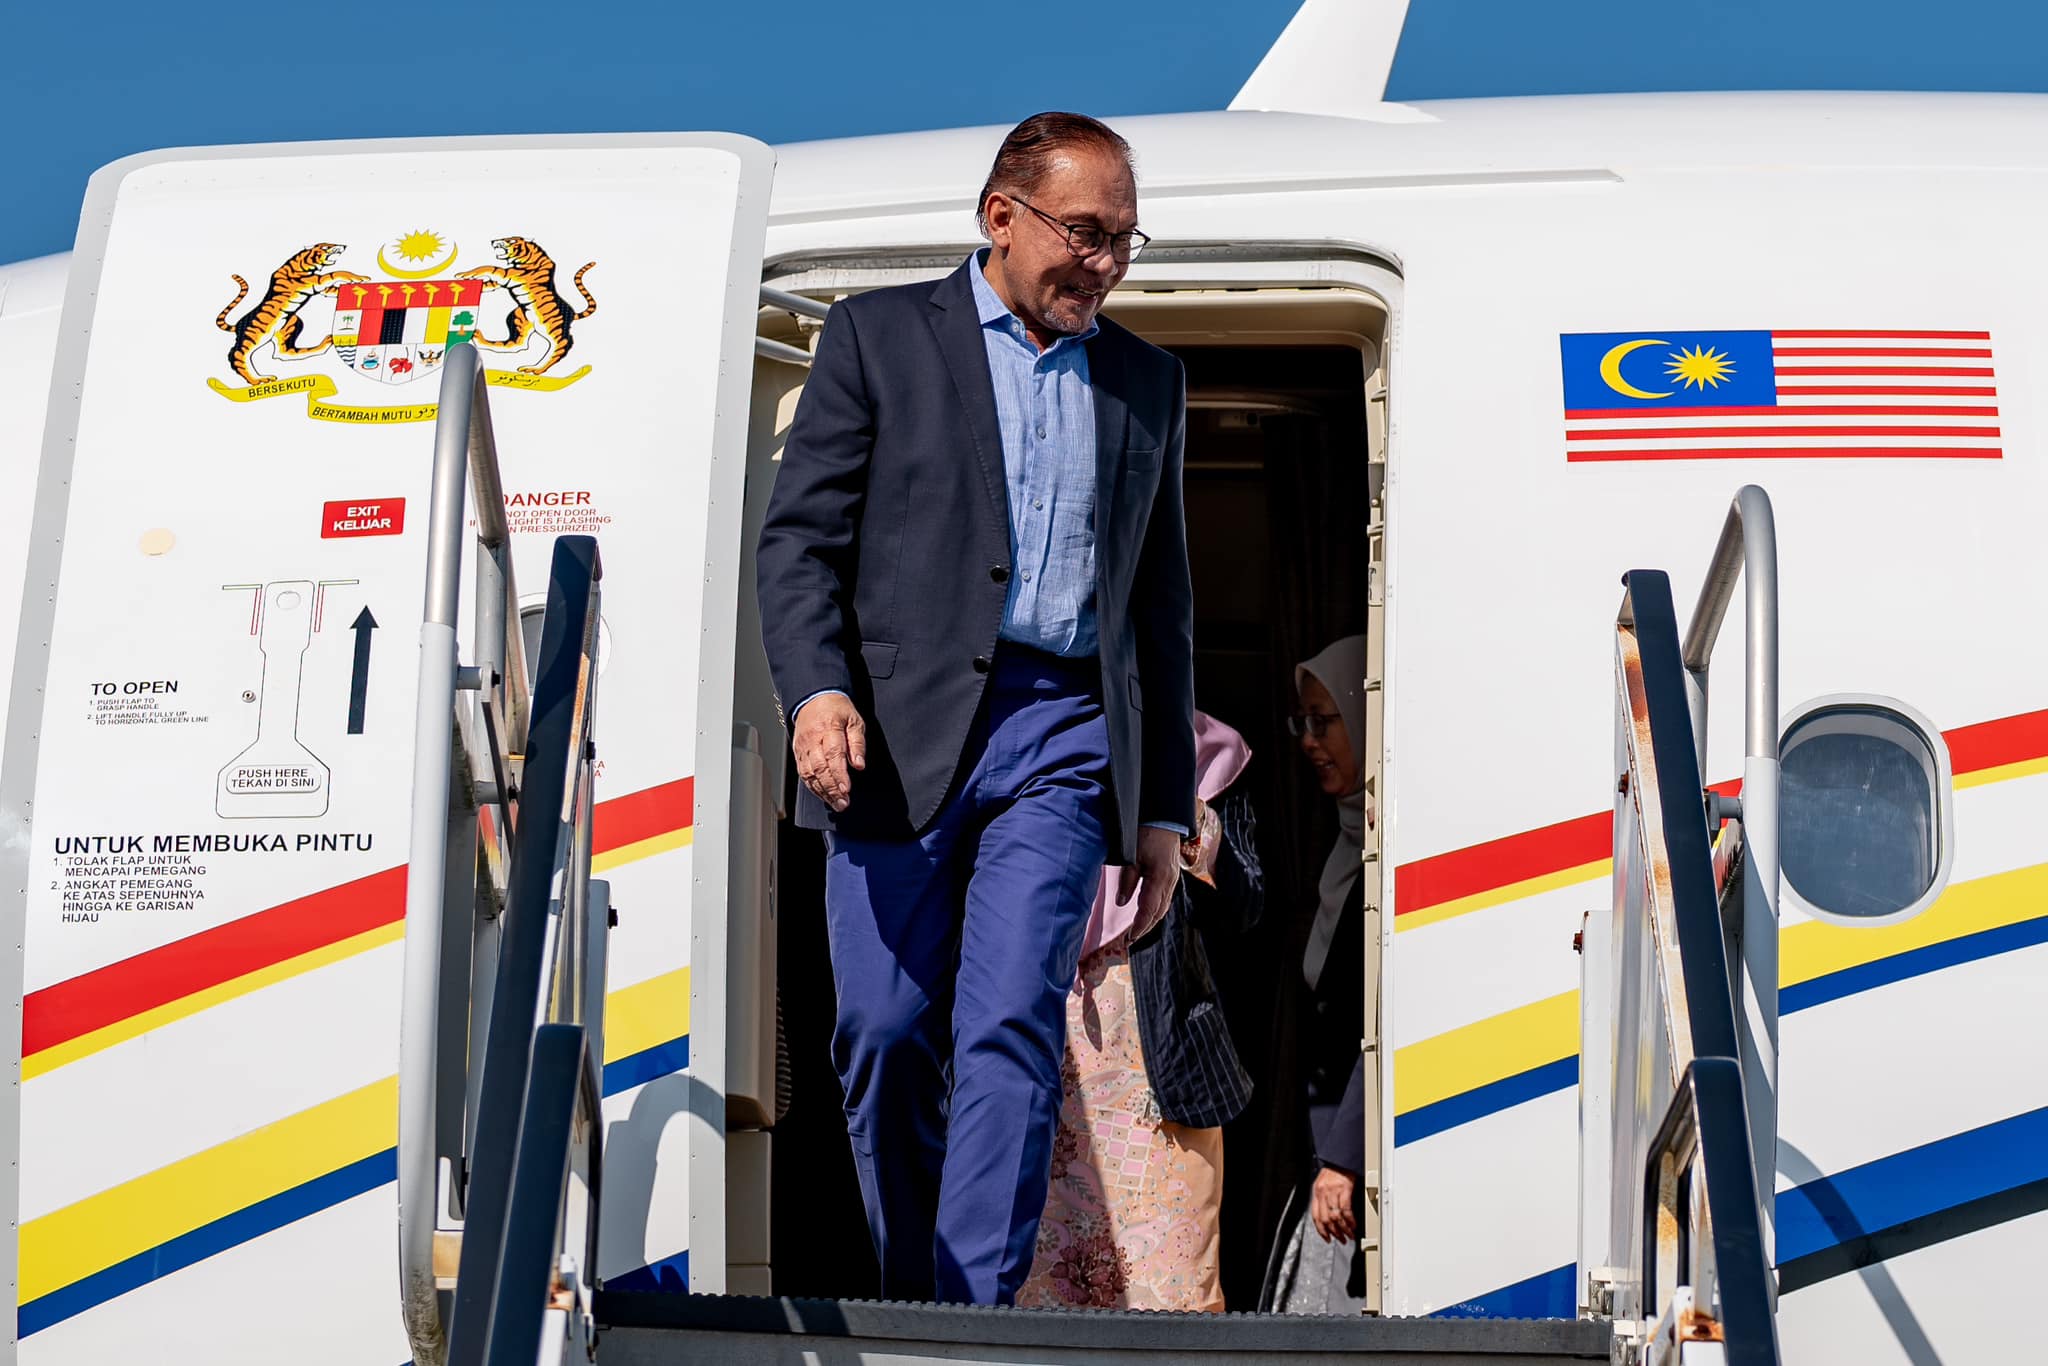 Anwar lands in New York for UN General Assembly